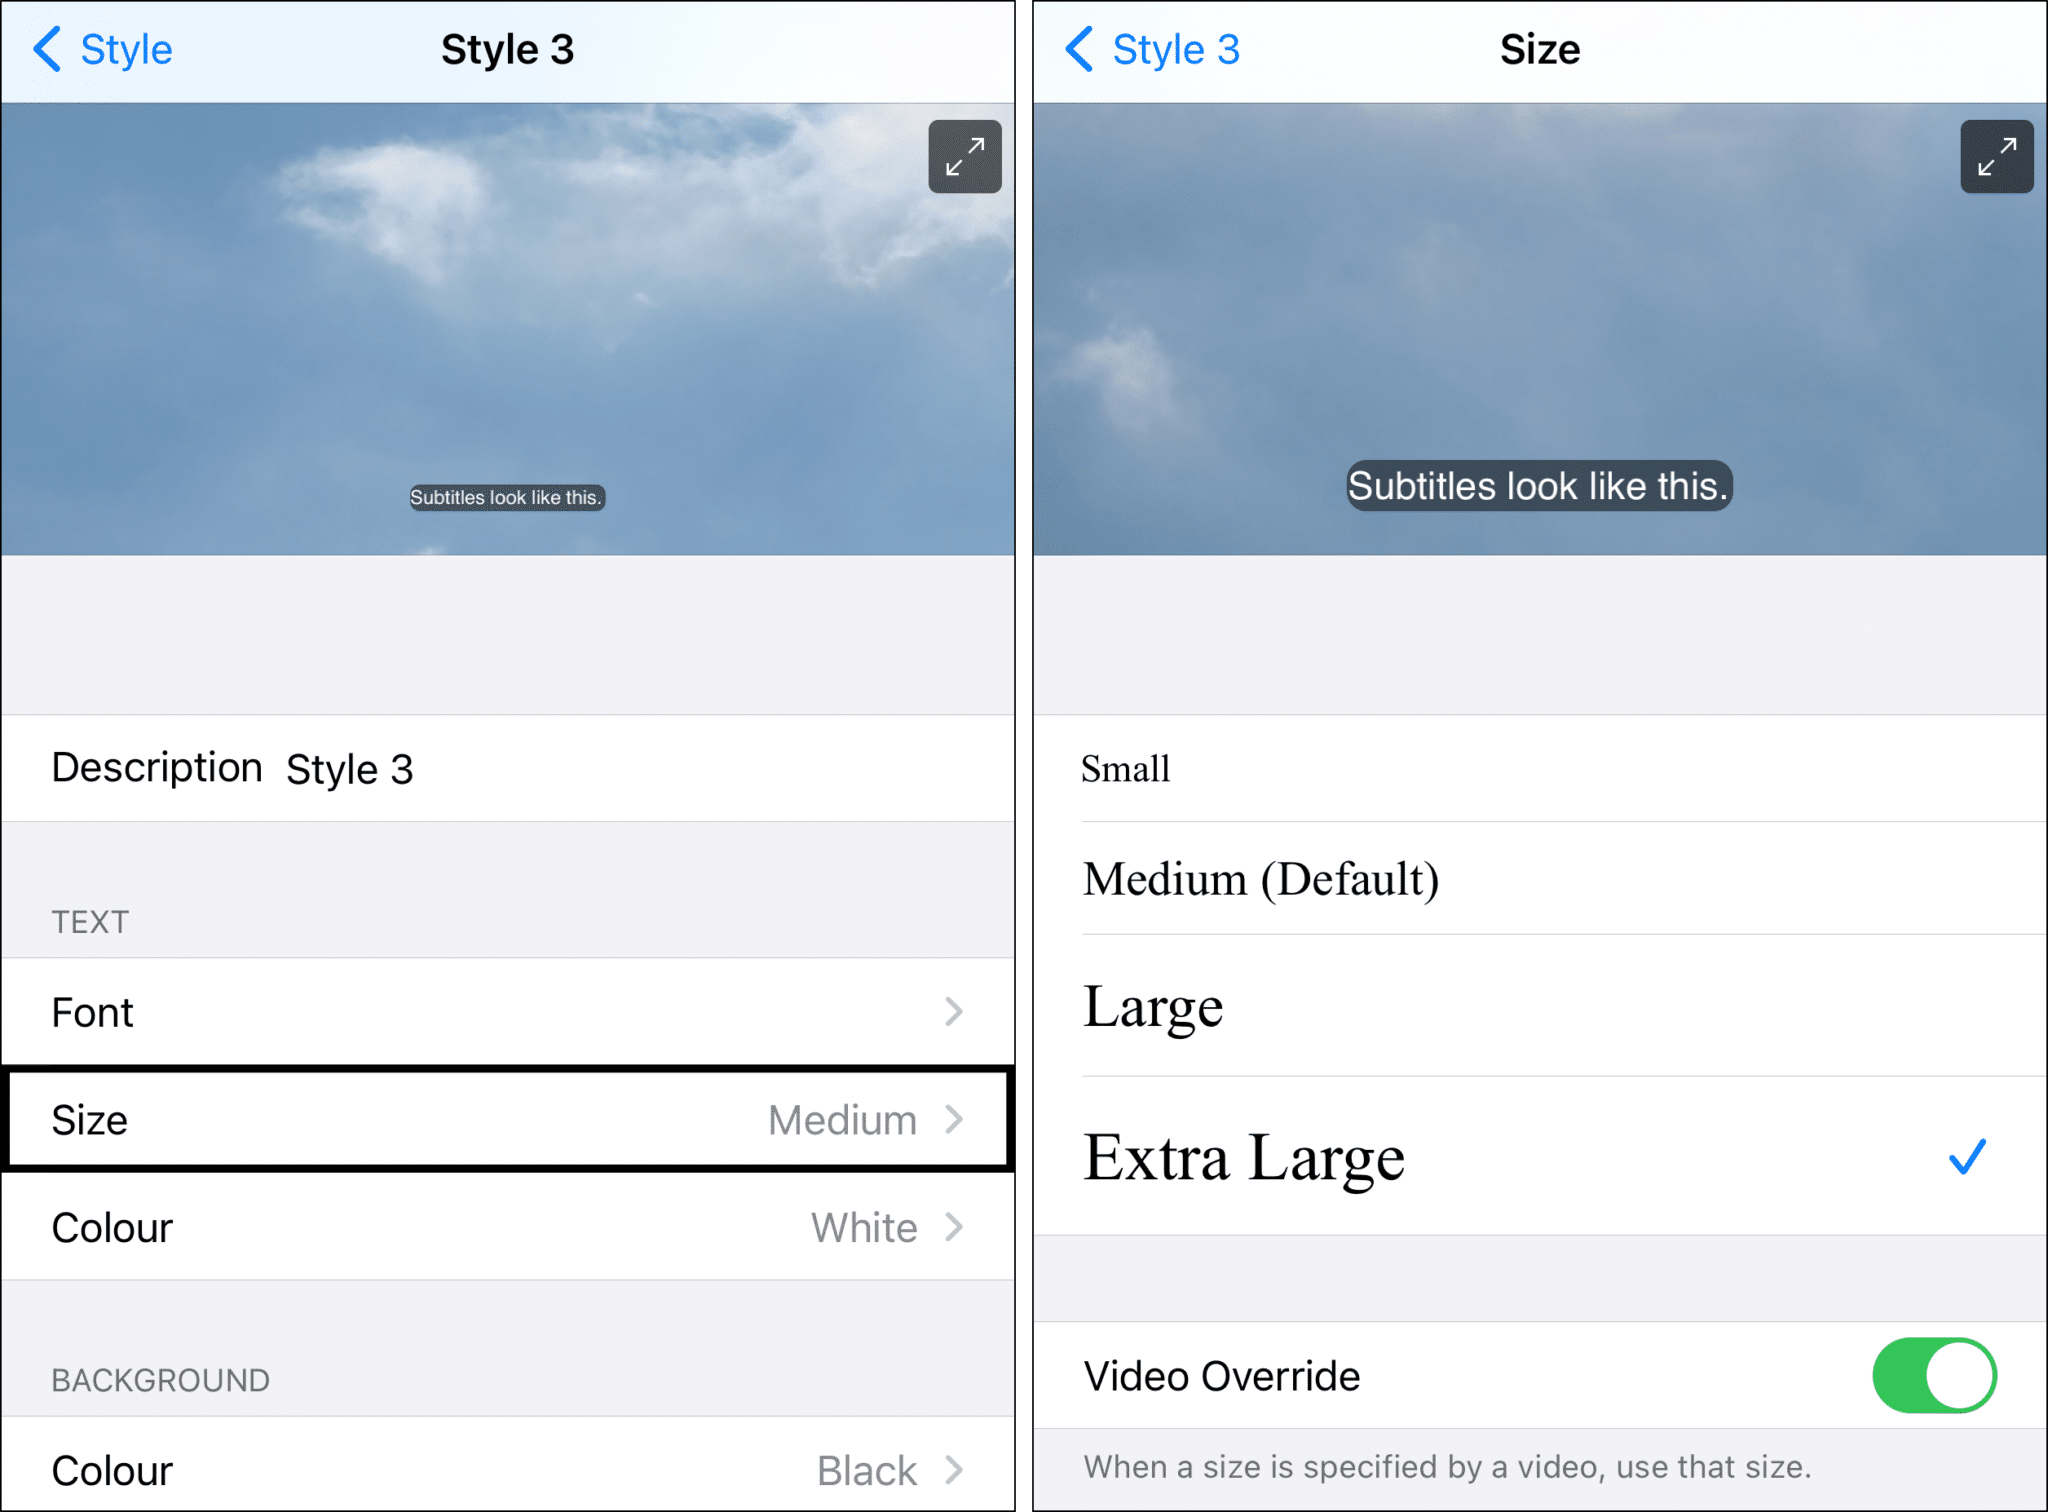 Changing the Size of Amazon Prime Video Subtitles on iPhone or iPad to fix subtitles too small